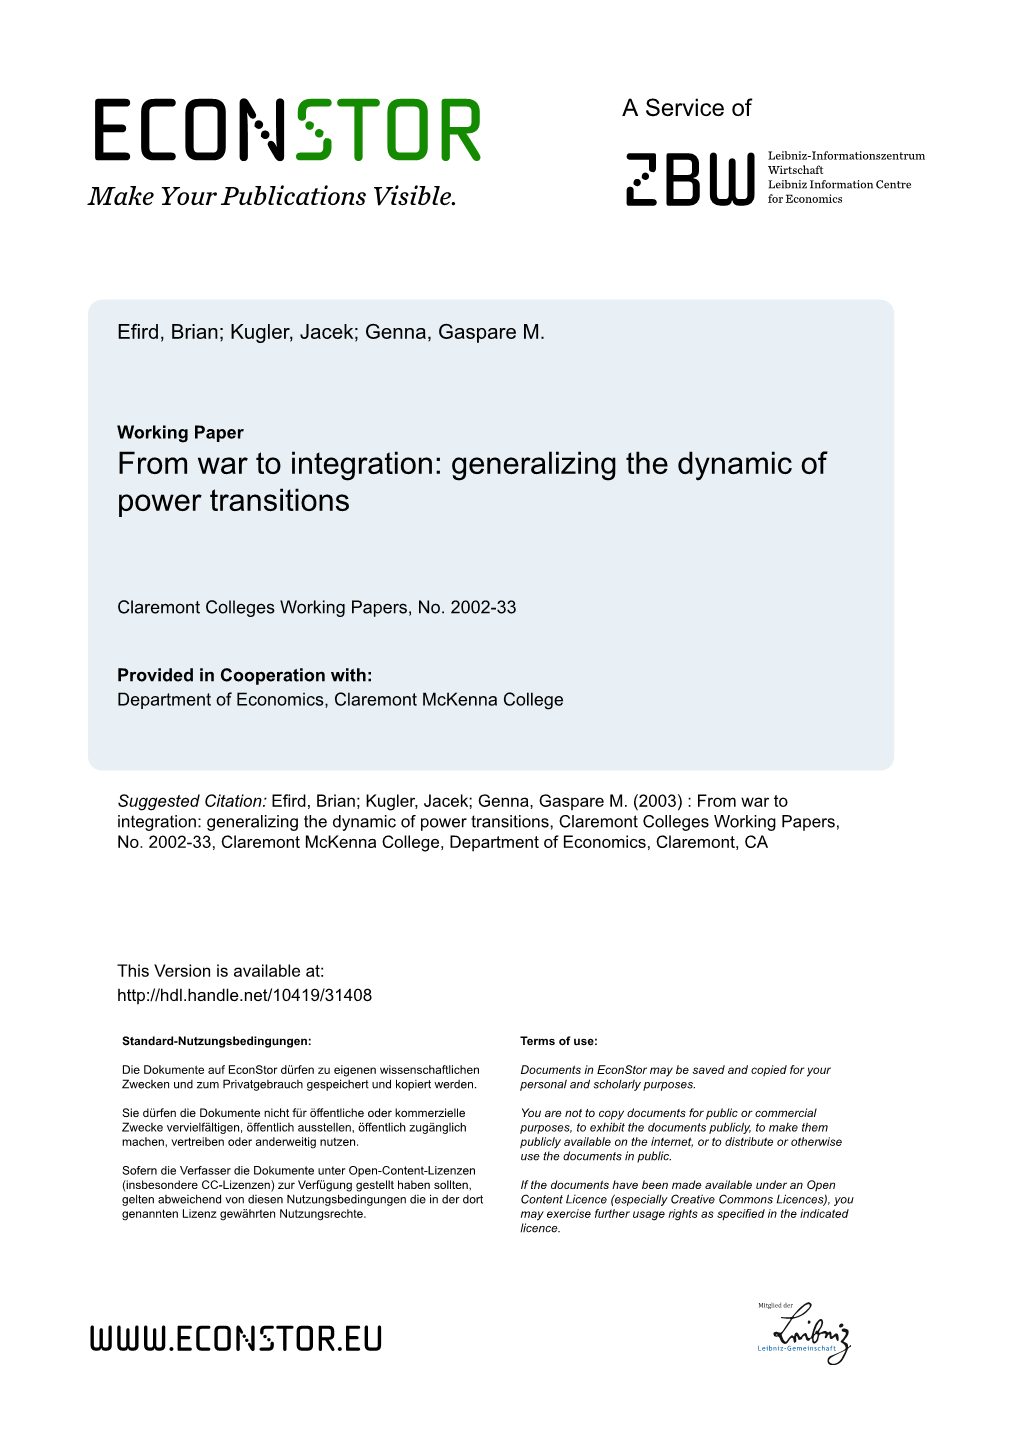 From War to Integration: Generalizing the Dynamic of Power Transitions